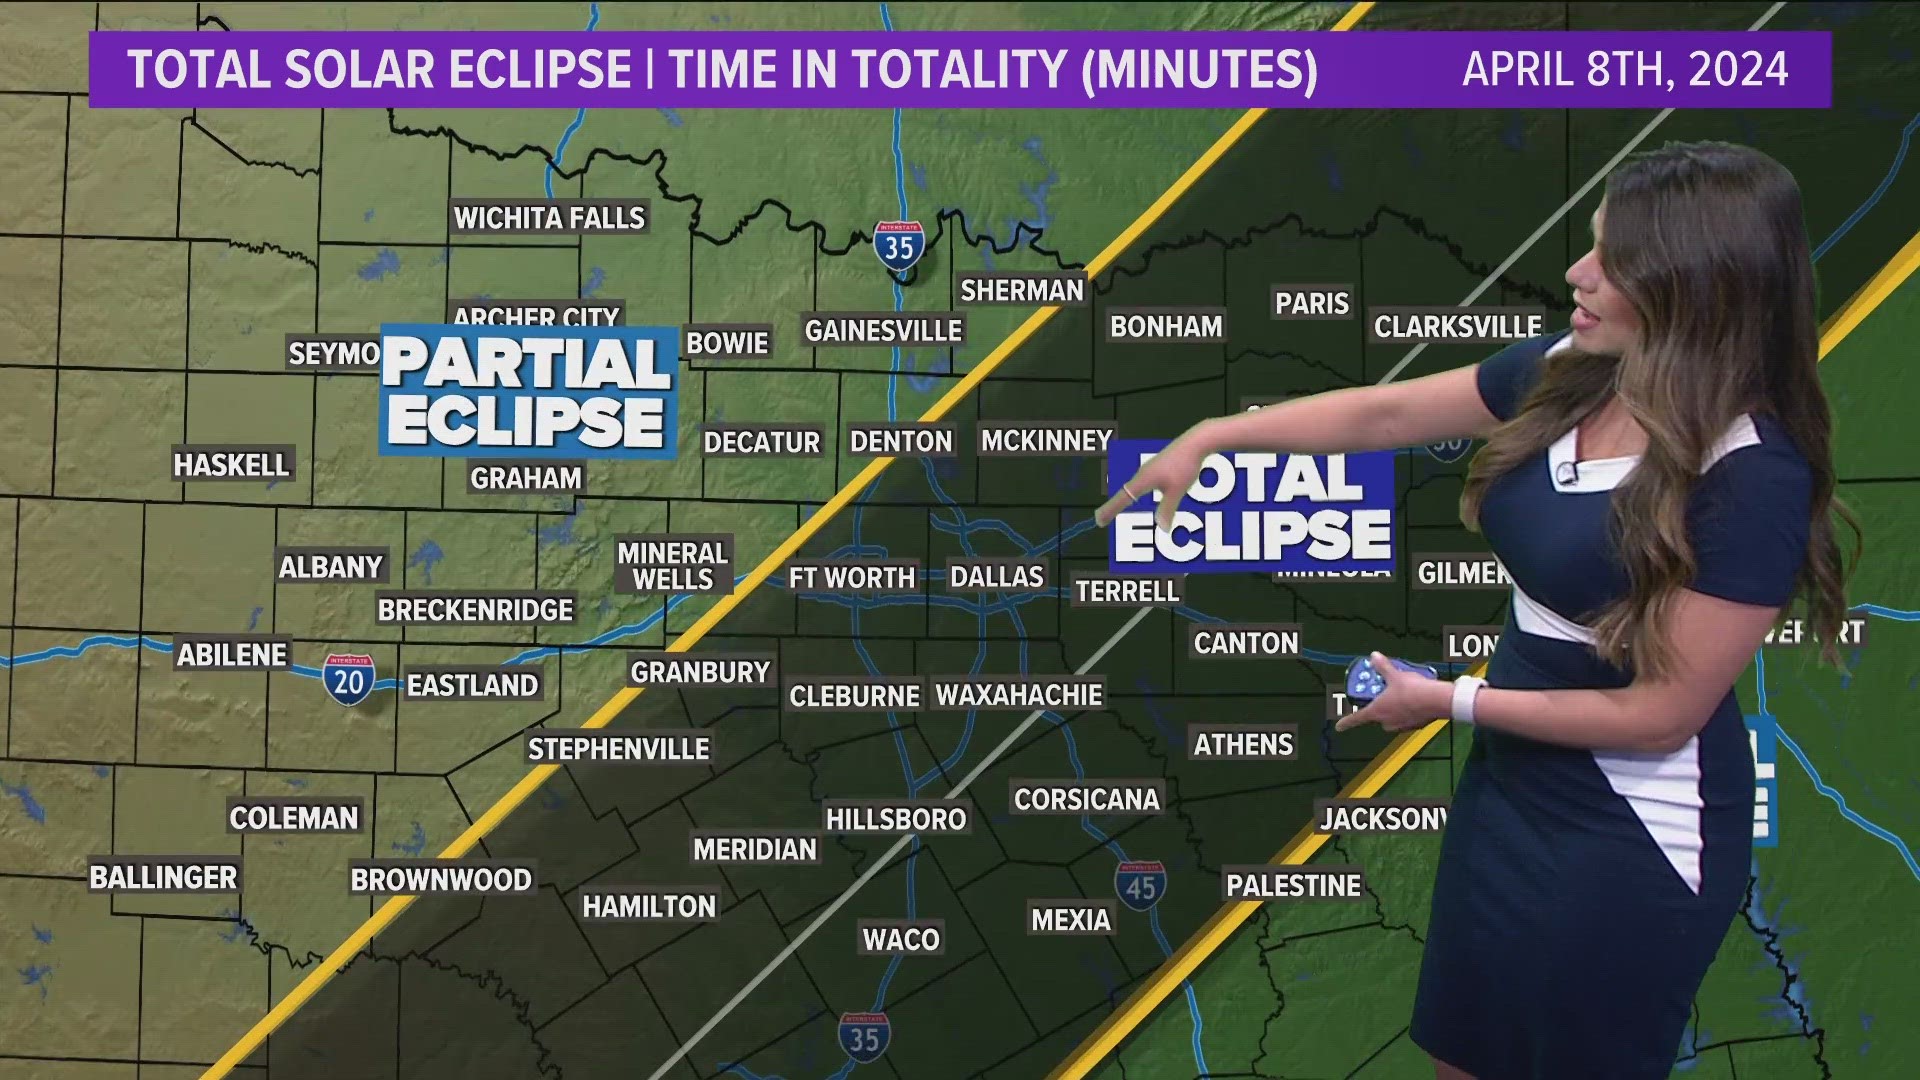 Total Solar Eclipse: What areas will spend the most amount of time in totality?